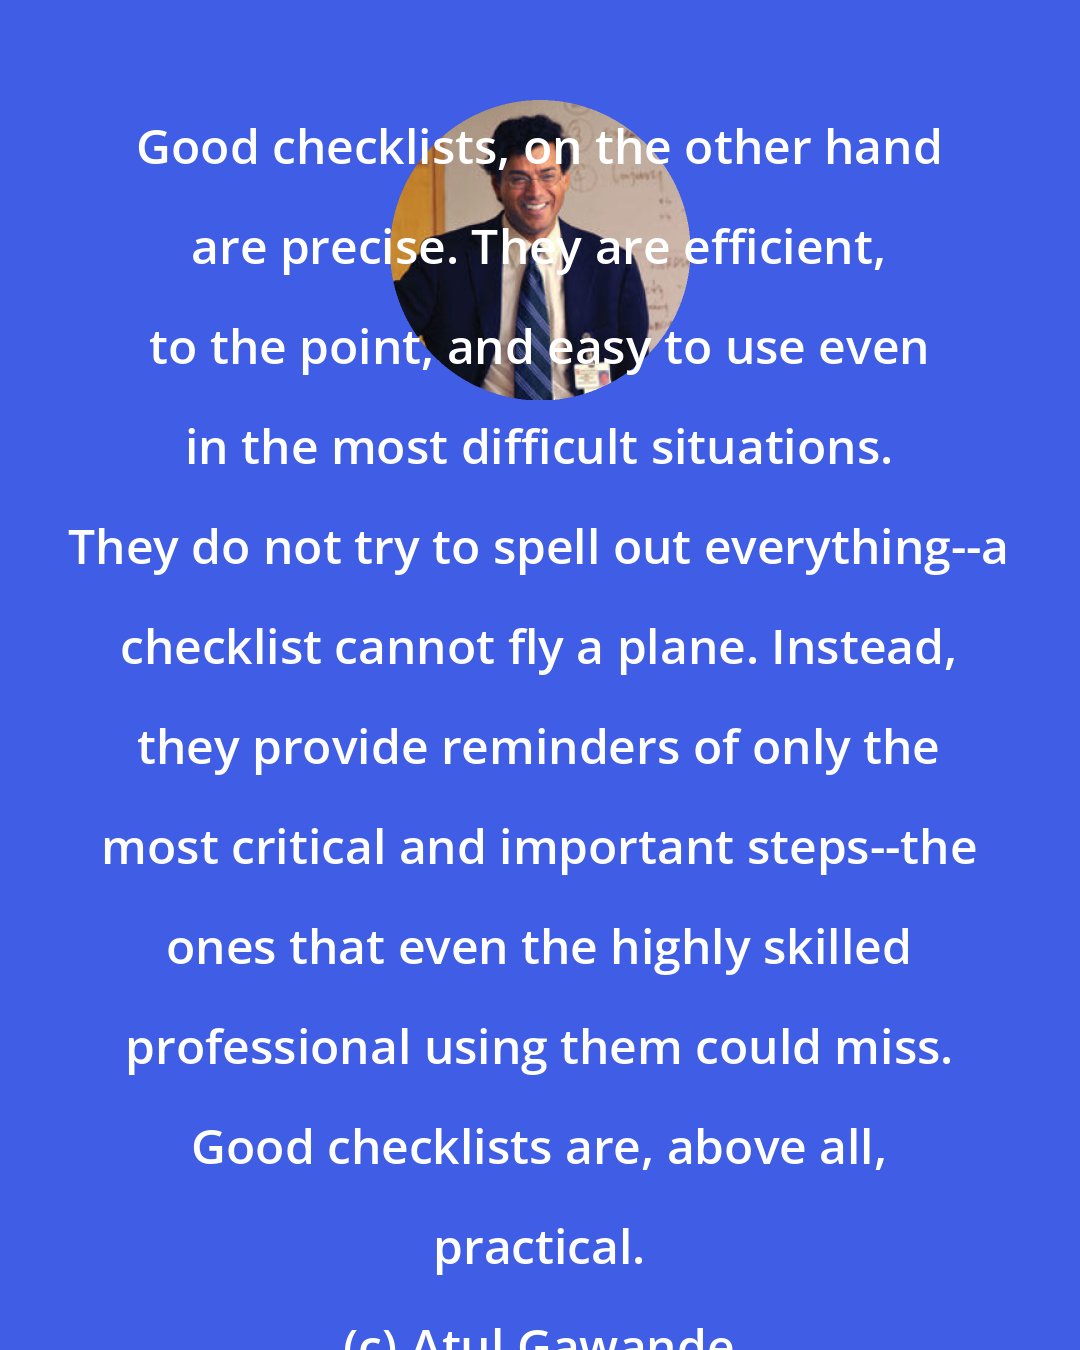 Atul Gawande: Good checklists, on the other hand are precise. They are efficient, to the point, and easy to use even in the most difficult situations. They do not try to spell out everything--a checklist cannot fly a plane. Instead, they provide reminders of only the most critical and important steps--the ones that even the highly skilled professional using them could miss. Good checklists are, above all, practical.